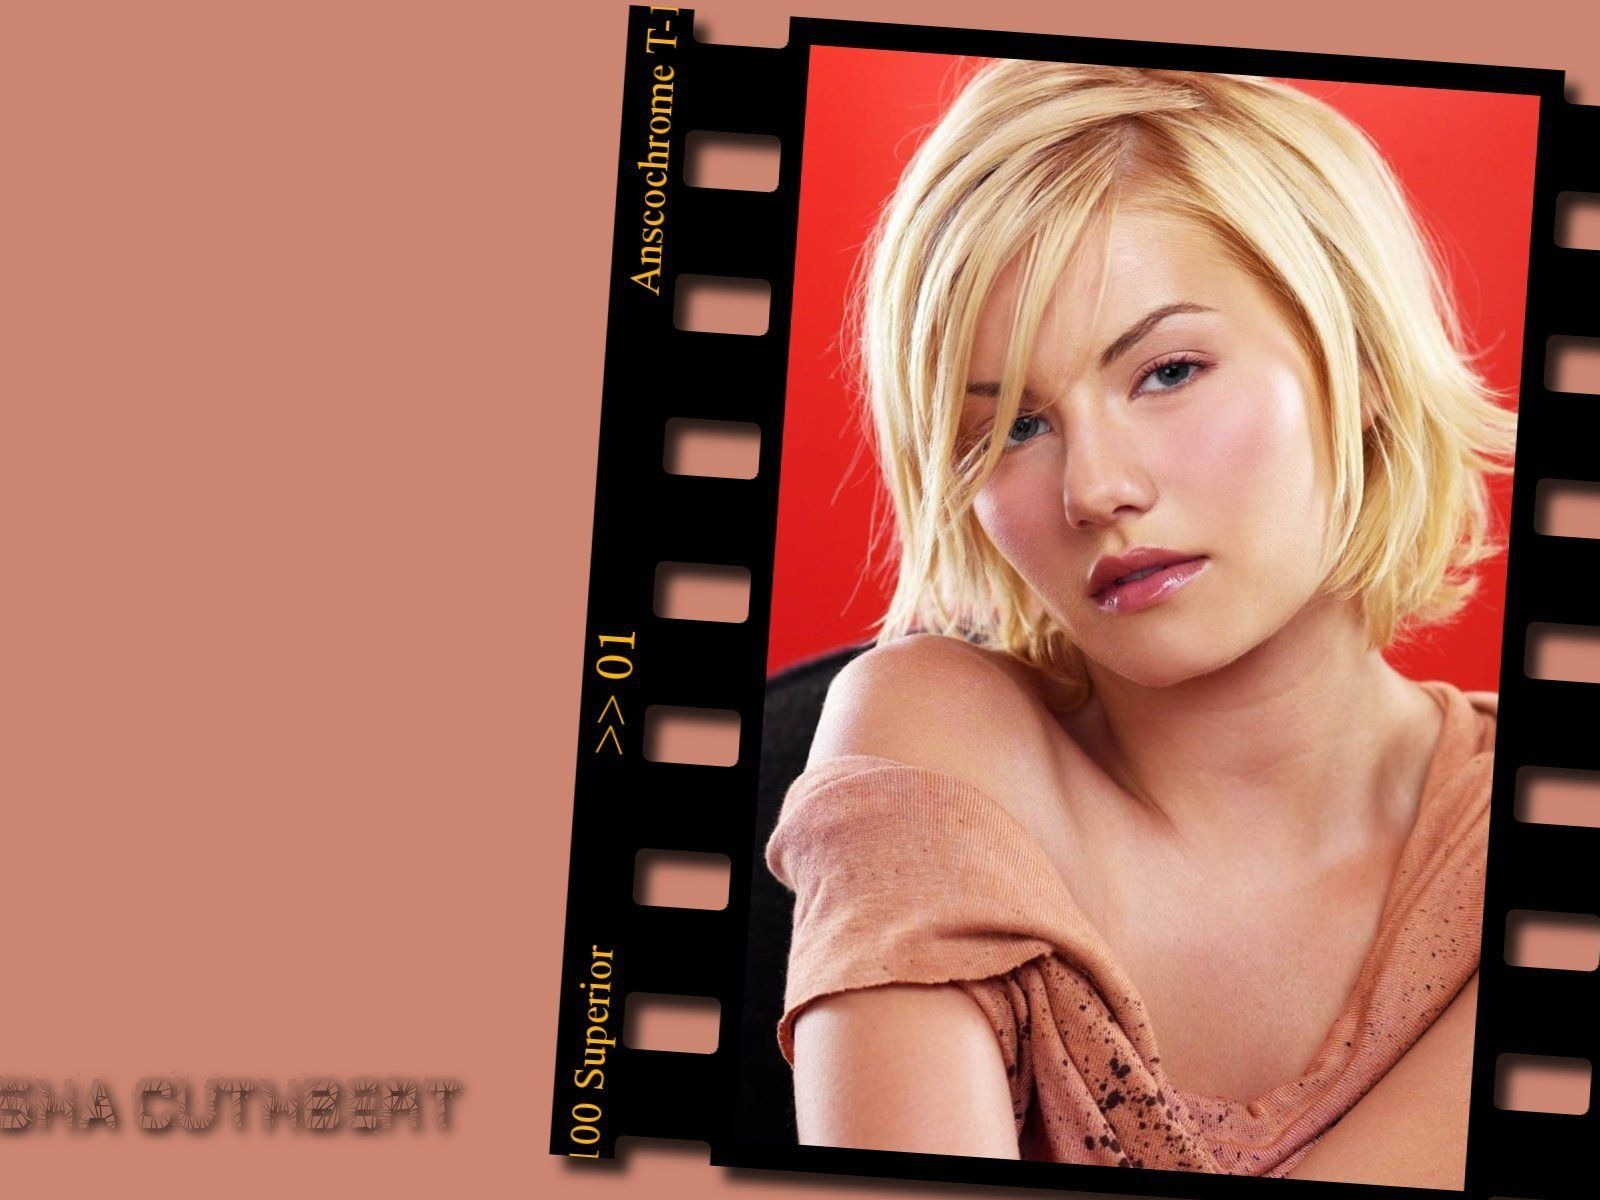 Elisha Cuthbert #015 - 1600x1200 Wallpapers Pictures Photos Images